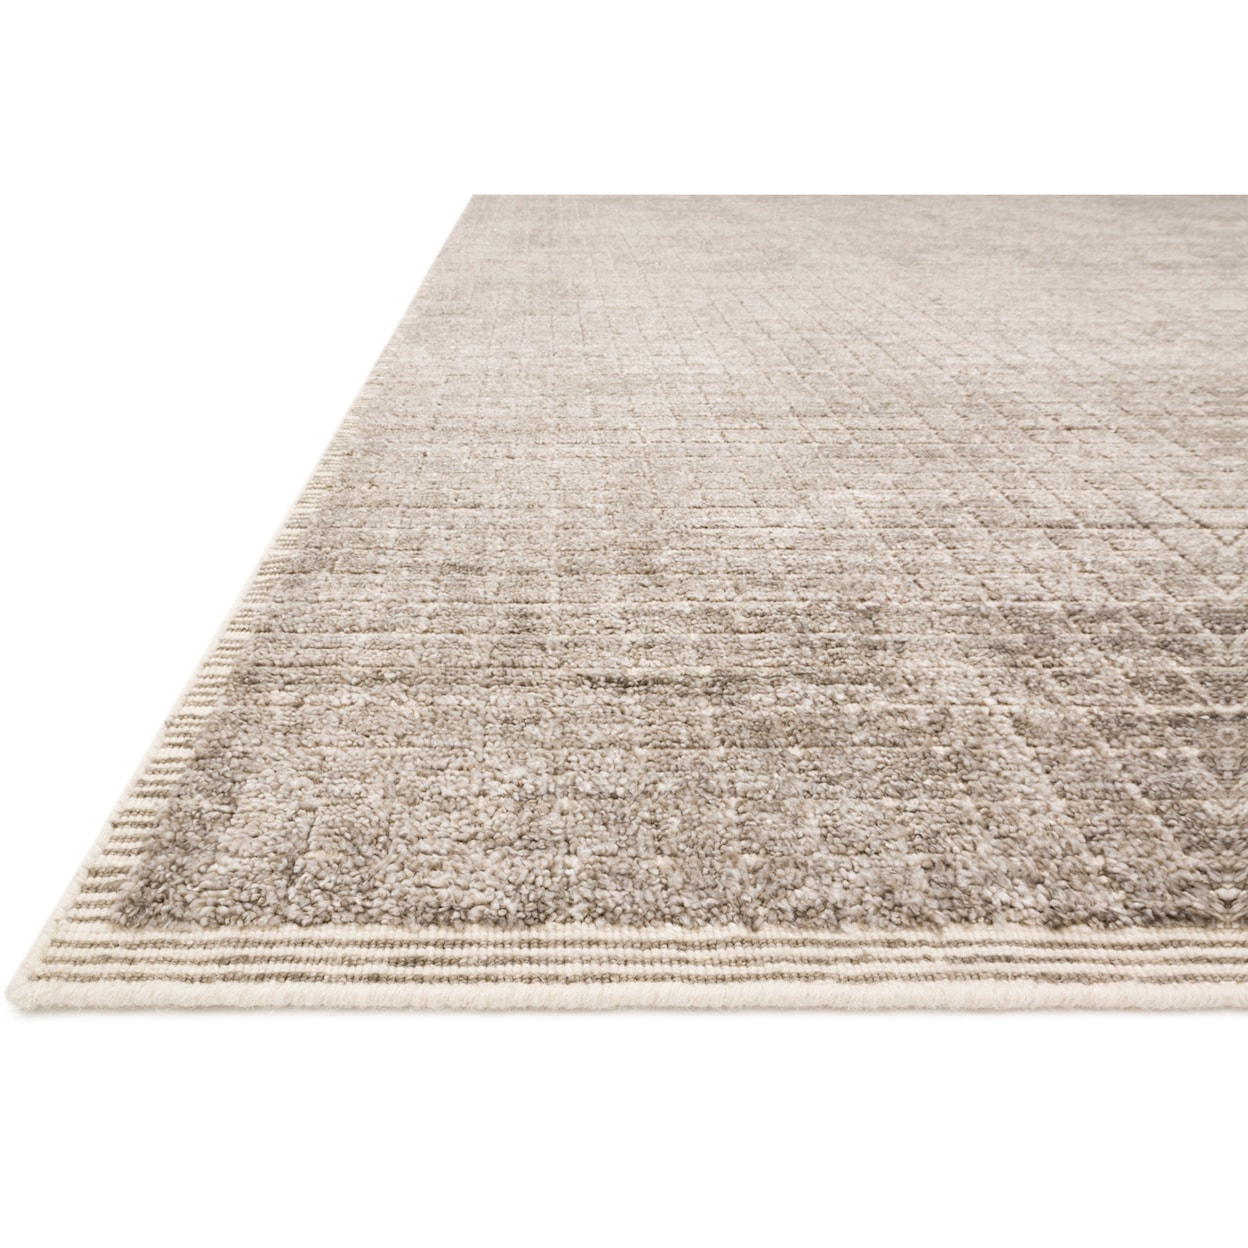 Loloi Rugs Beverly 4'0" x 6'0" Stone Rug